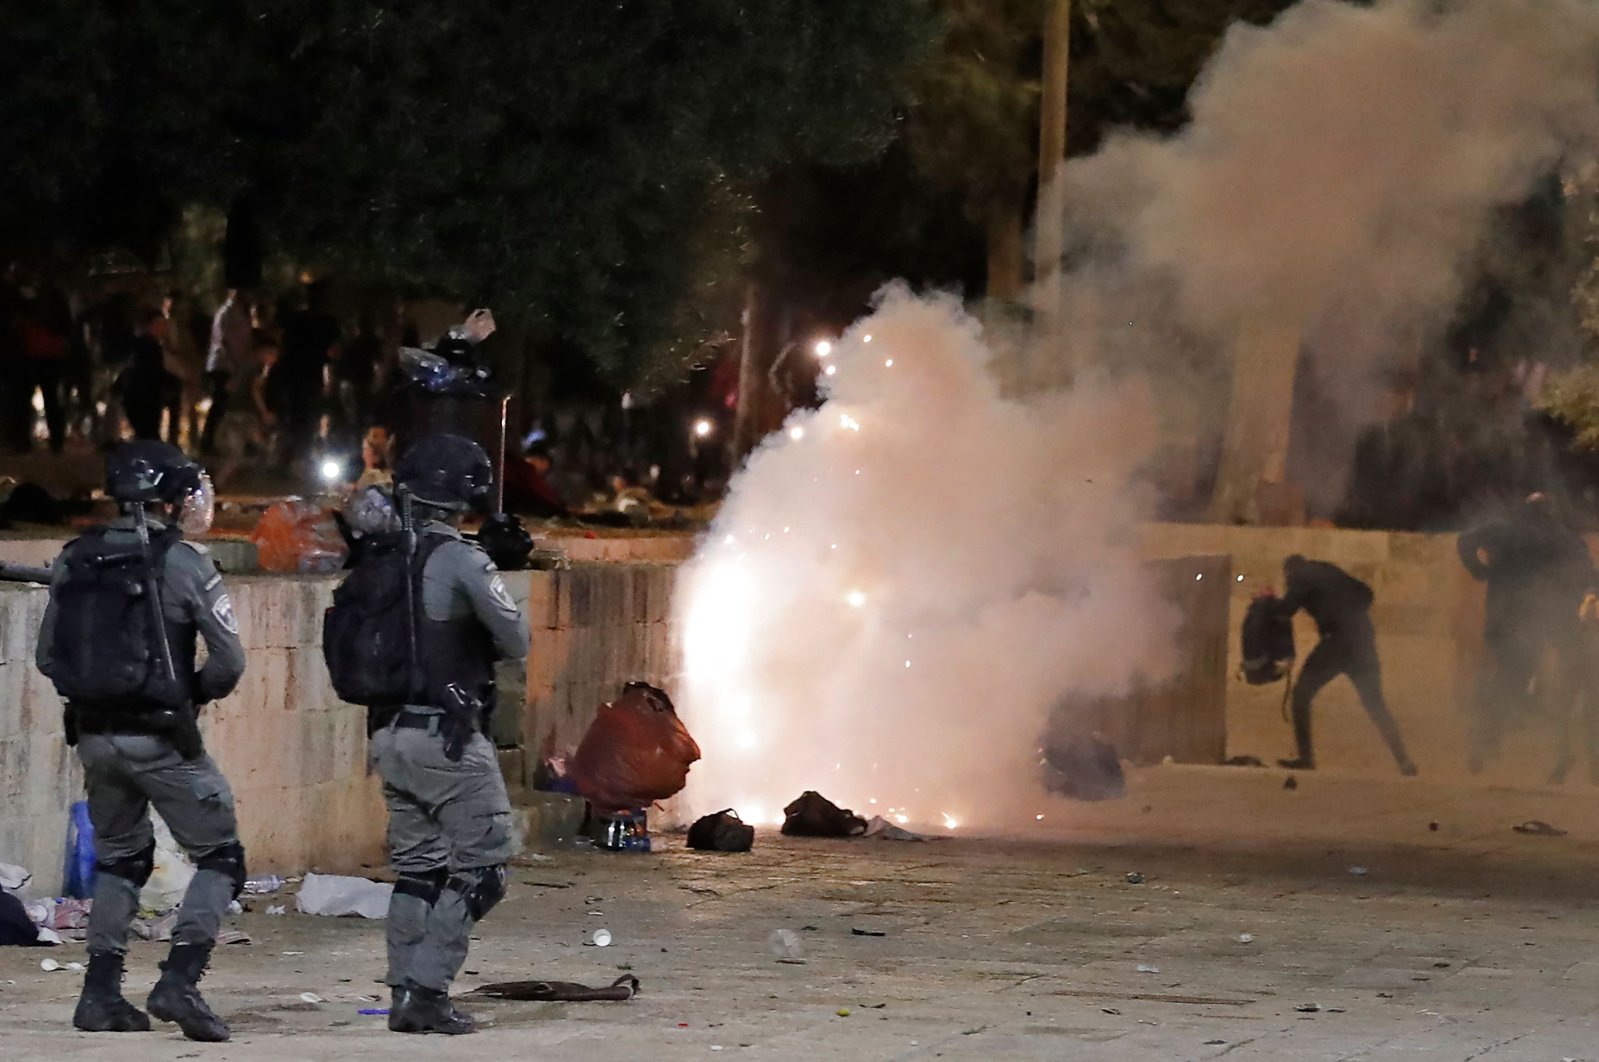 Tear gas billows as Israeli police officers raid the Al-Aqsa Mosque and attack Palestinian worshippers in East Jerusalem, May 7, 2021. (AFP Photo)